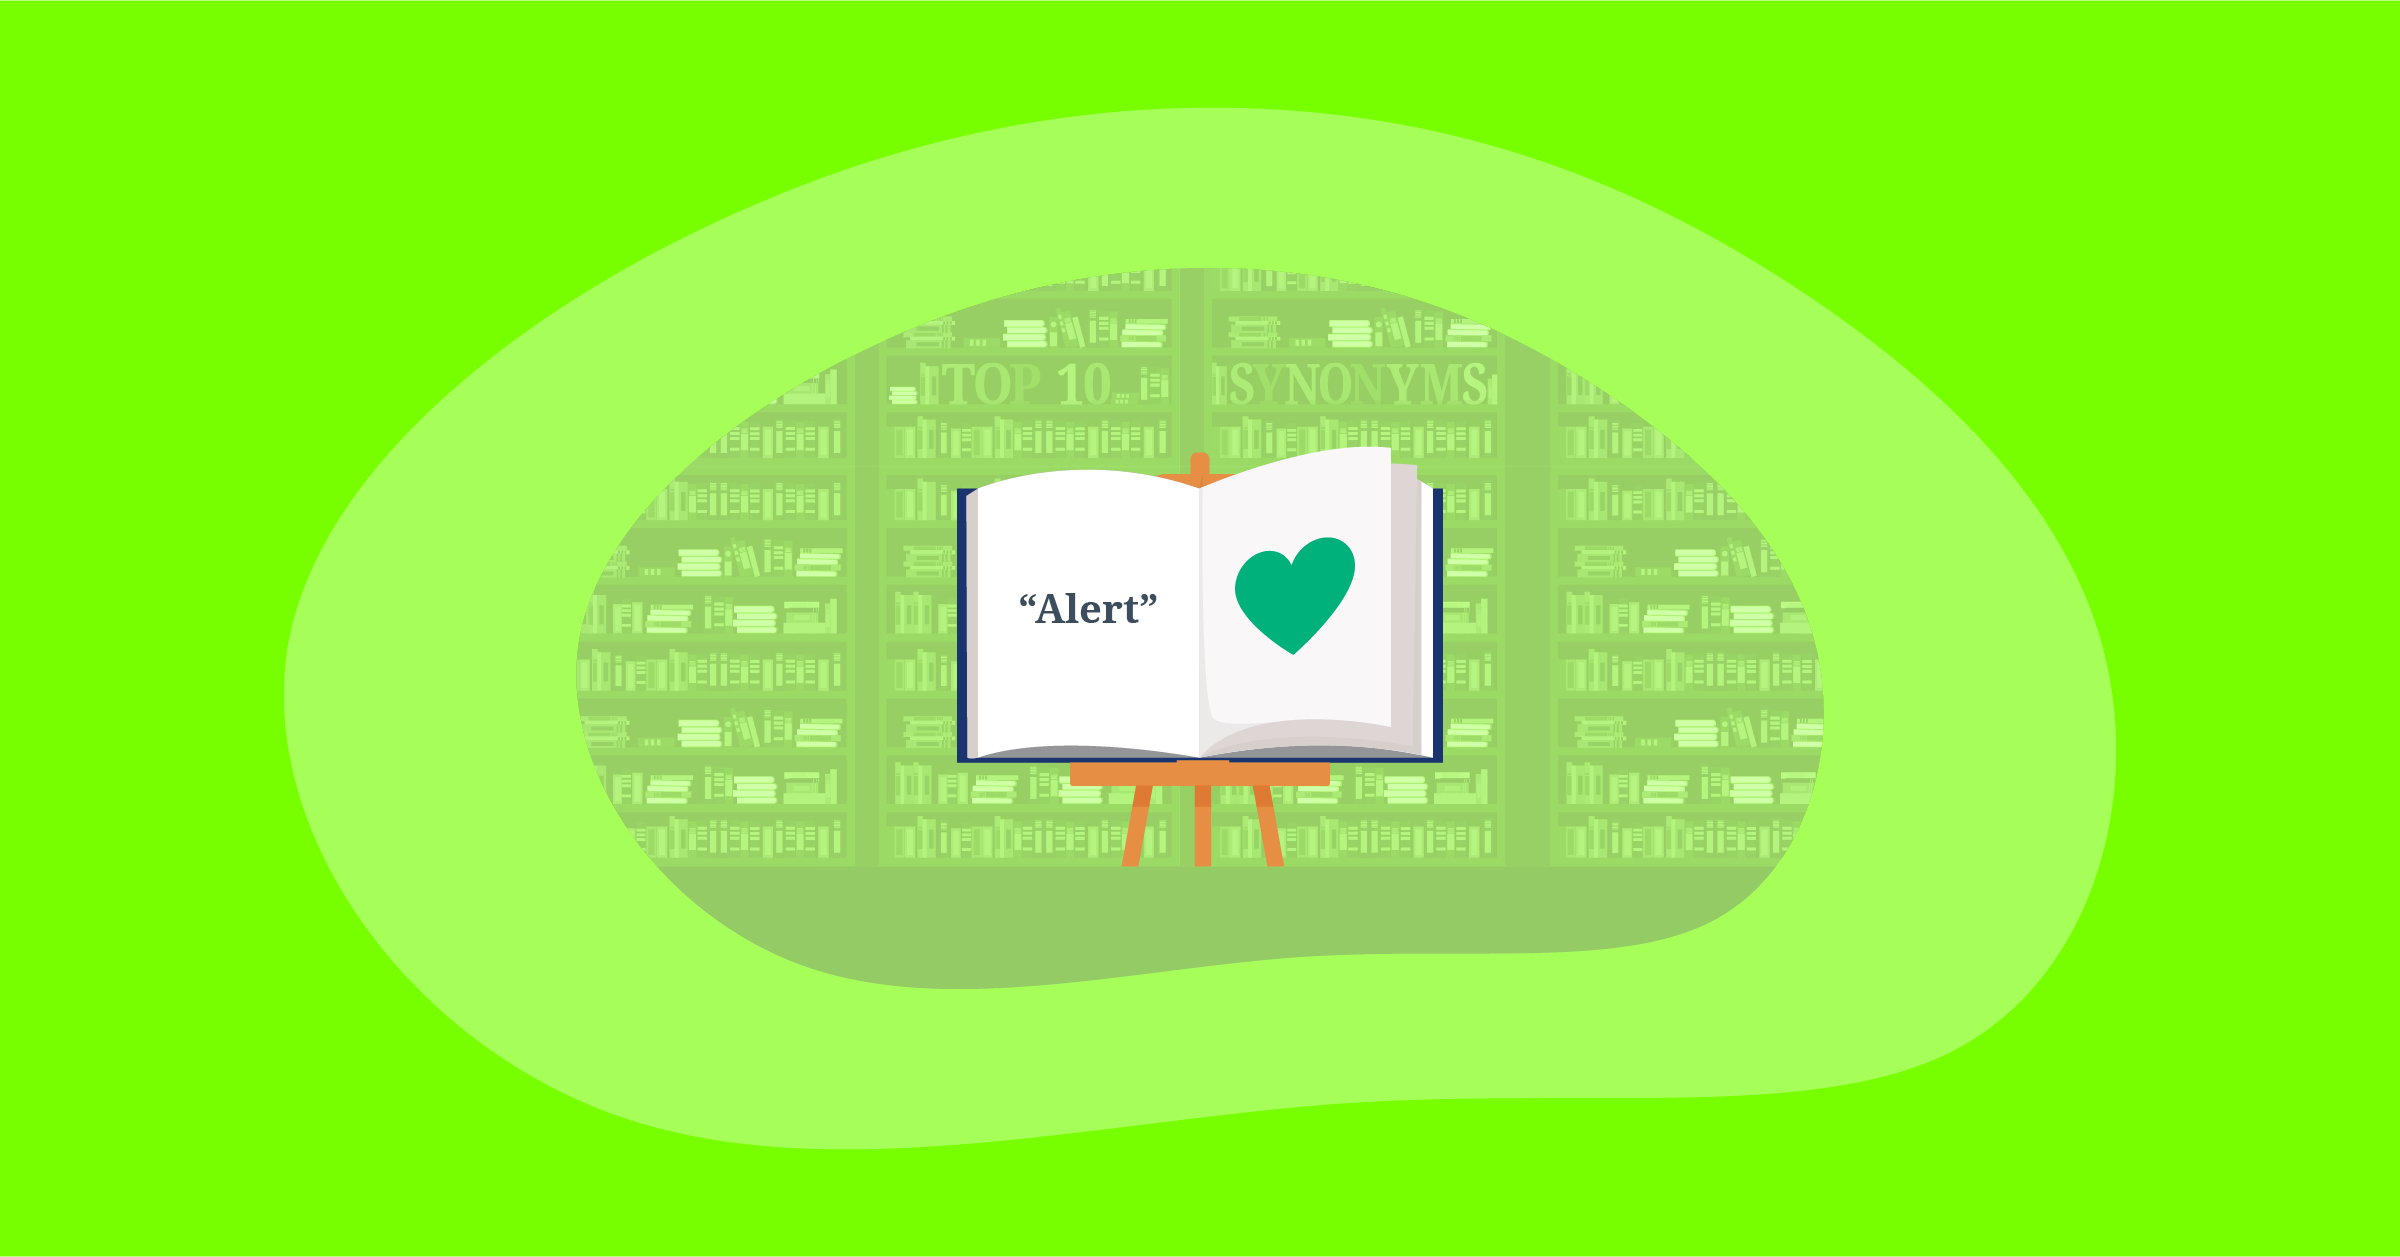 Illustration for Top 10 Positive & Impactful Synonyms for “Alert”